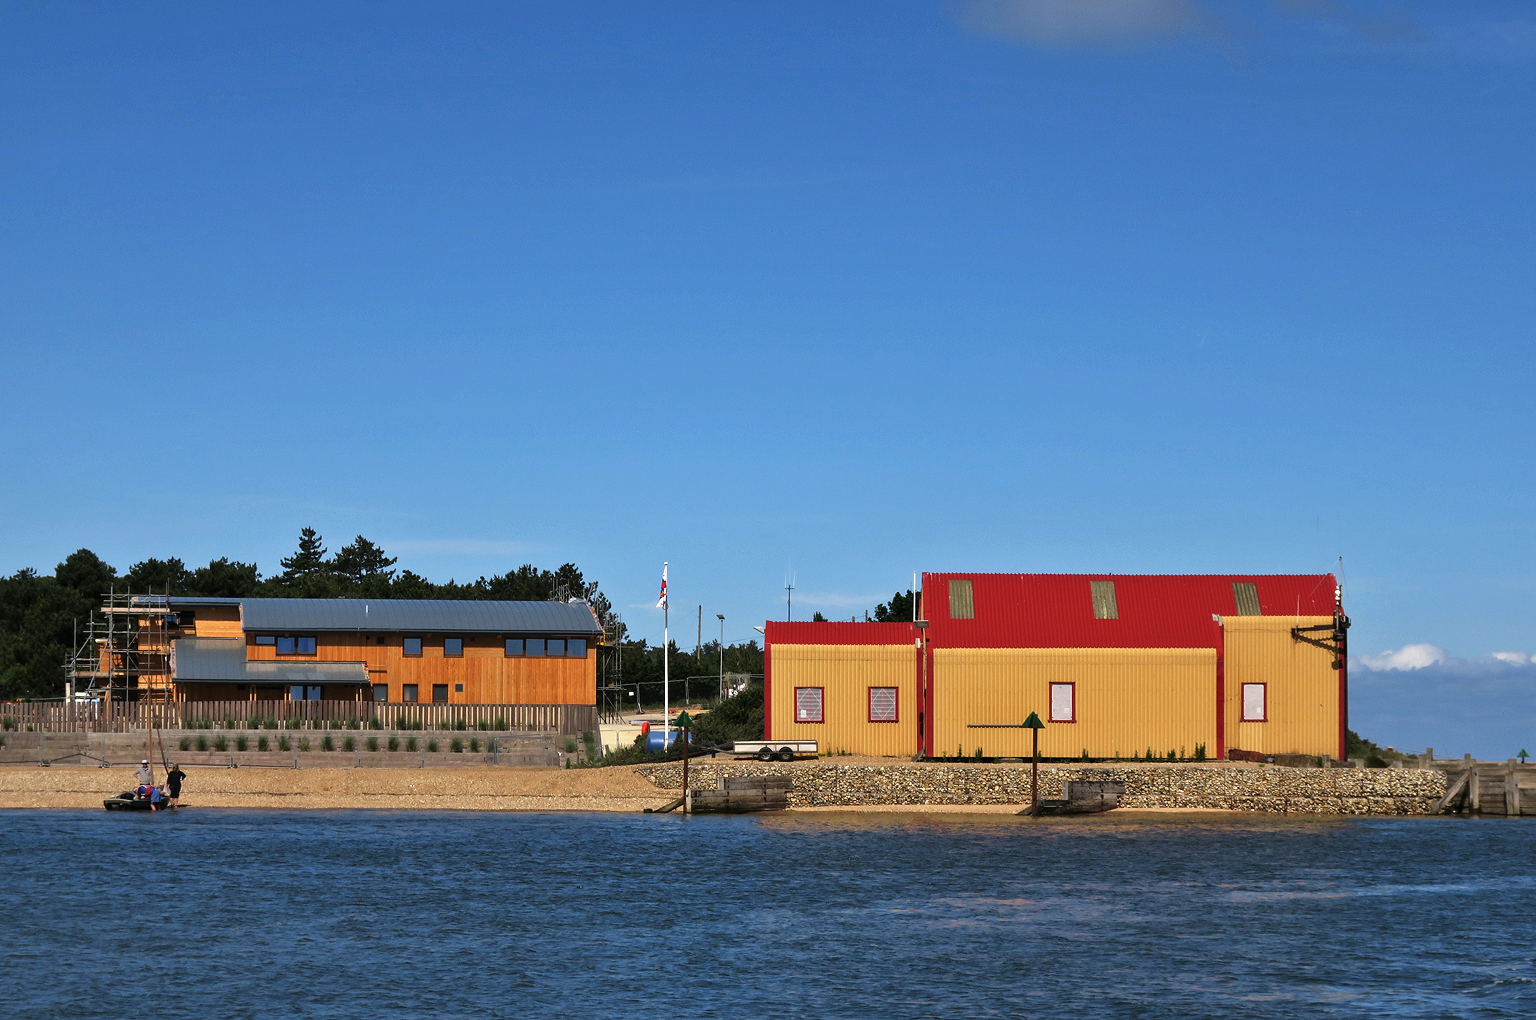 New and old boathouses side by side